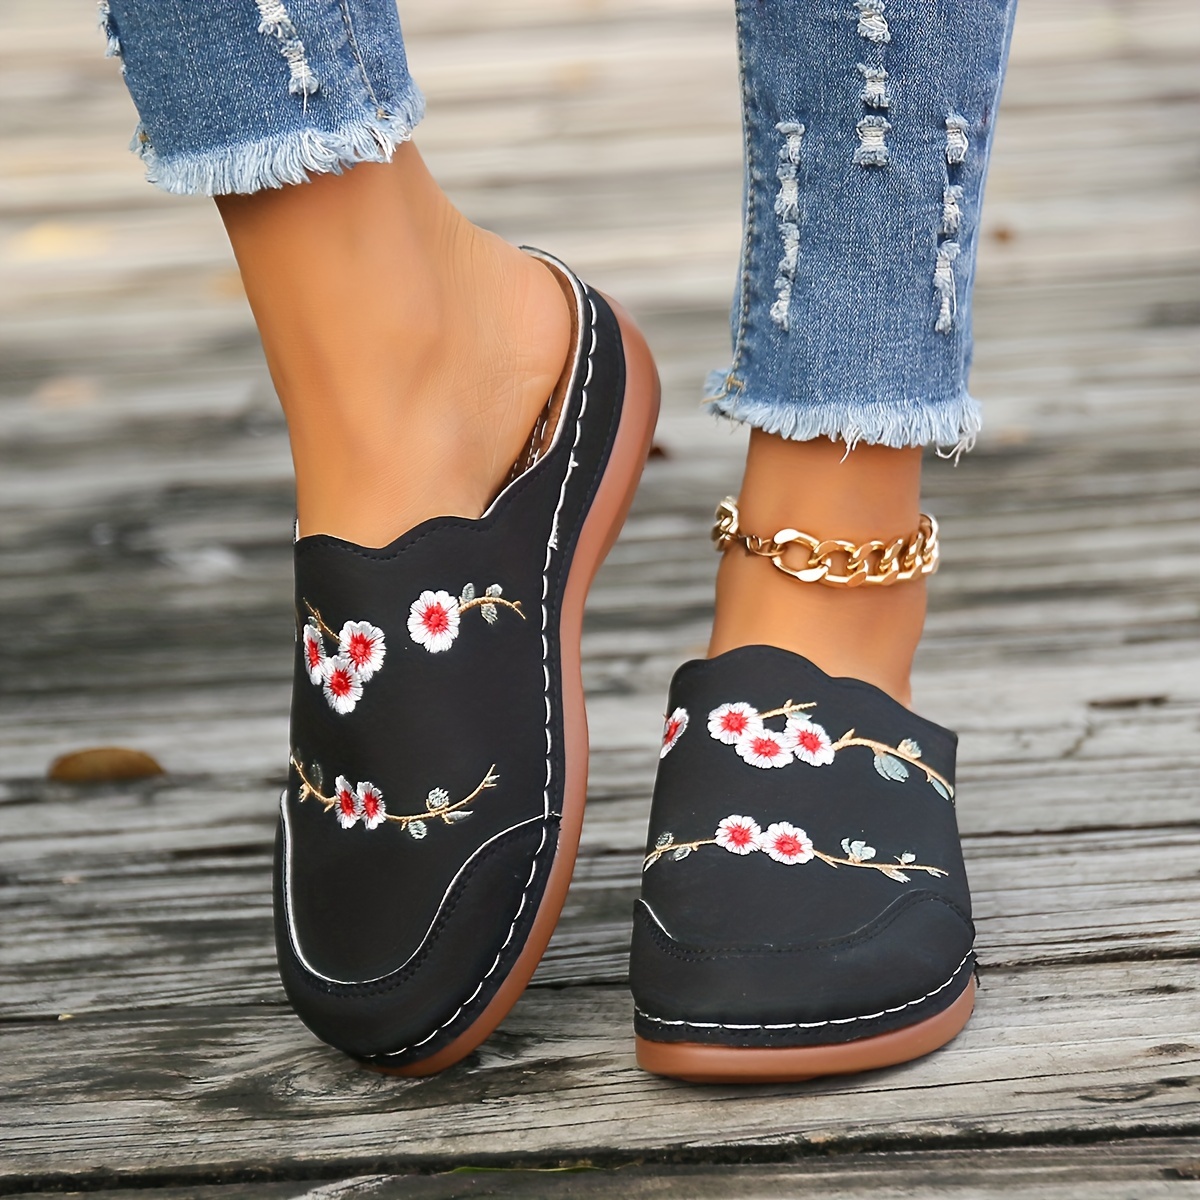 SOCOFY Retro Sandals Paisley Pattern Embroidery Slip On Wood Mules Clogs  Comfy Low Heel Sandals For Easter Gifts Summer Spring